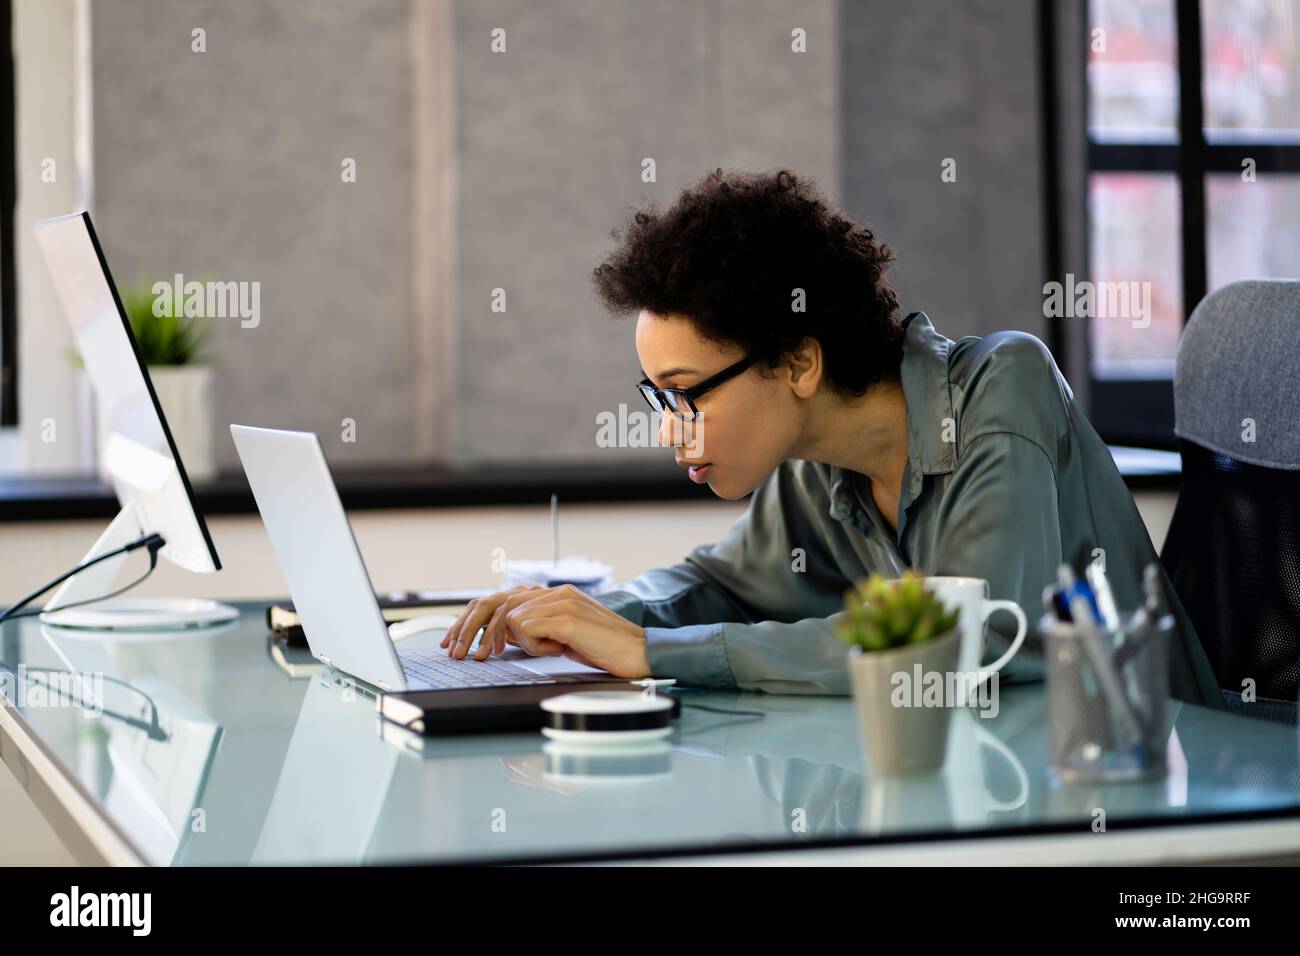 African Woman Bad Posture Working Typing At Desk Stock Photo